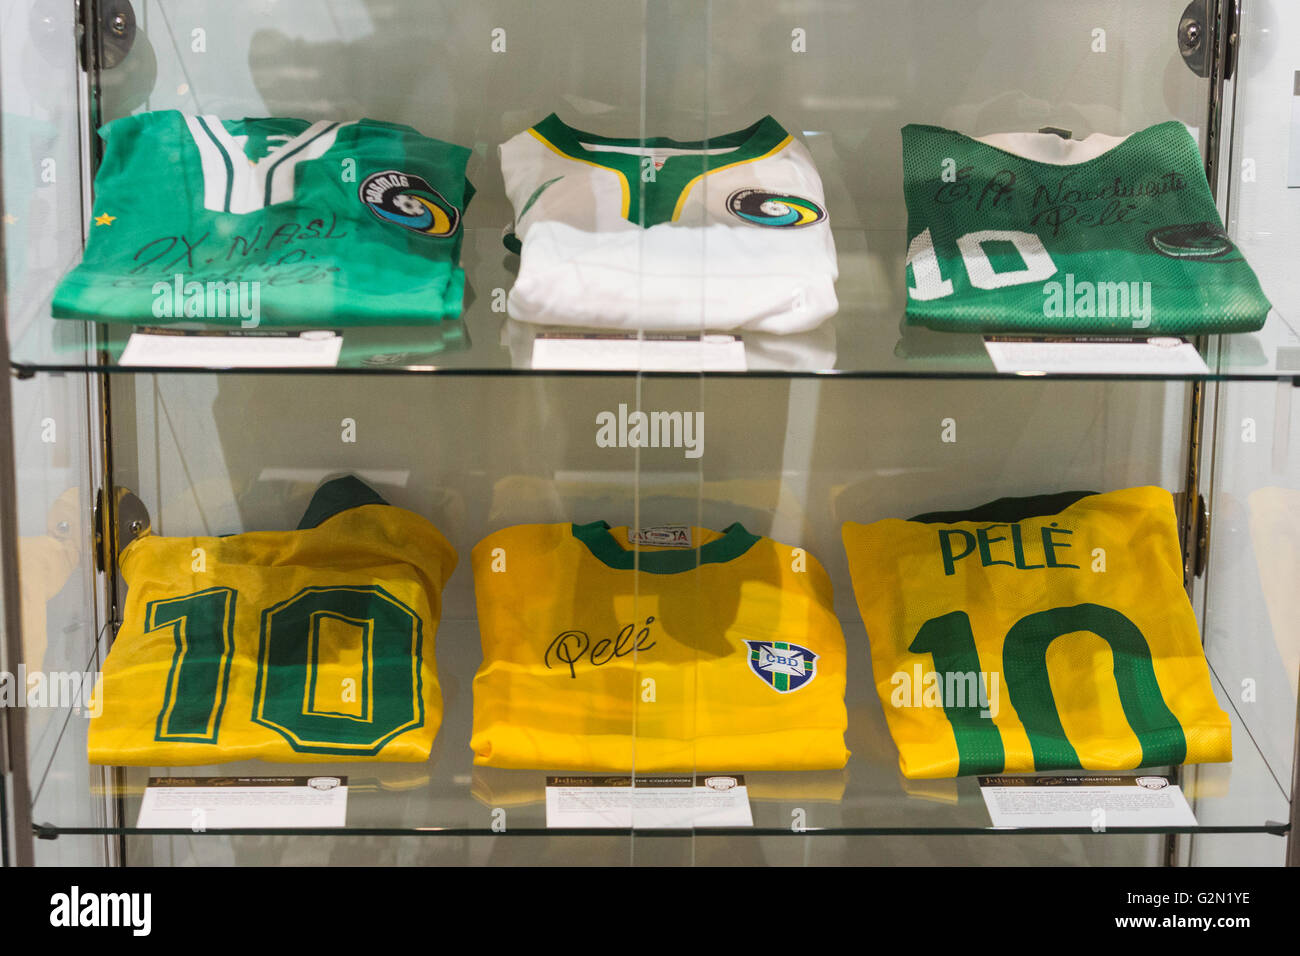 London, UK. 1 June 2016. Press preview of Pele - The Collection, a sale run by Julien's Auctions at Mall Galleries. Highlights include Pele's Jules Rimet Trophy; 1958, 1962 and 1970 World Cup Medals; Santos FC game worn jerseys and boots; awards received while playing with Santos FC; his 1977 New York Cosmos NASL championship ring; FIFA Player of the Century Award; L'Equipe Athlete of the Century Award; 2007 FIFA President's Award and the torch used by Pele when he ran in the 2004 Summer Olympics Torch Relay. Stock Photo